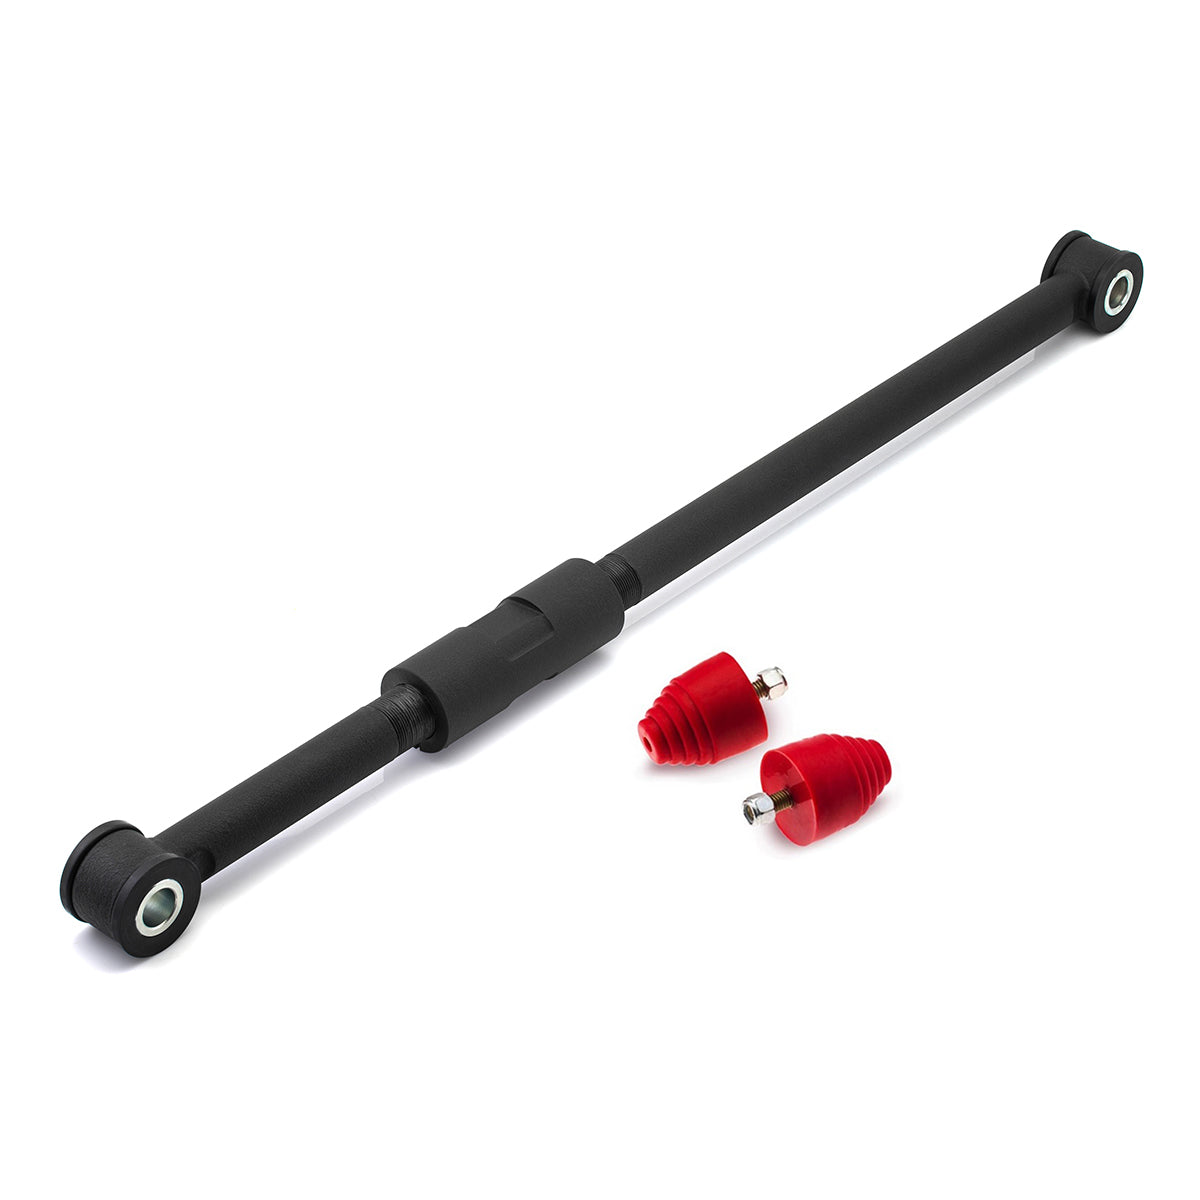 2000-2005 Ford Excursion Adjustable Track Bar for 2-6" Lifts with Bump Stops